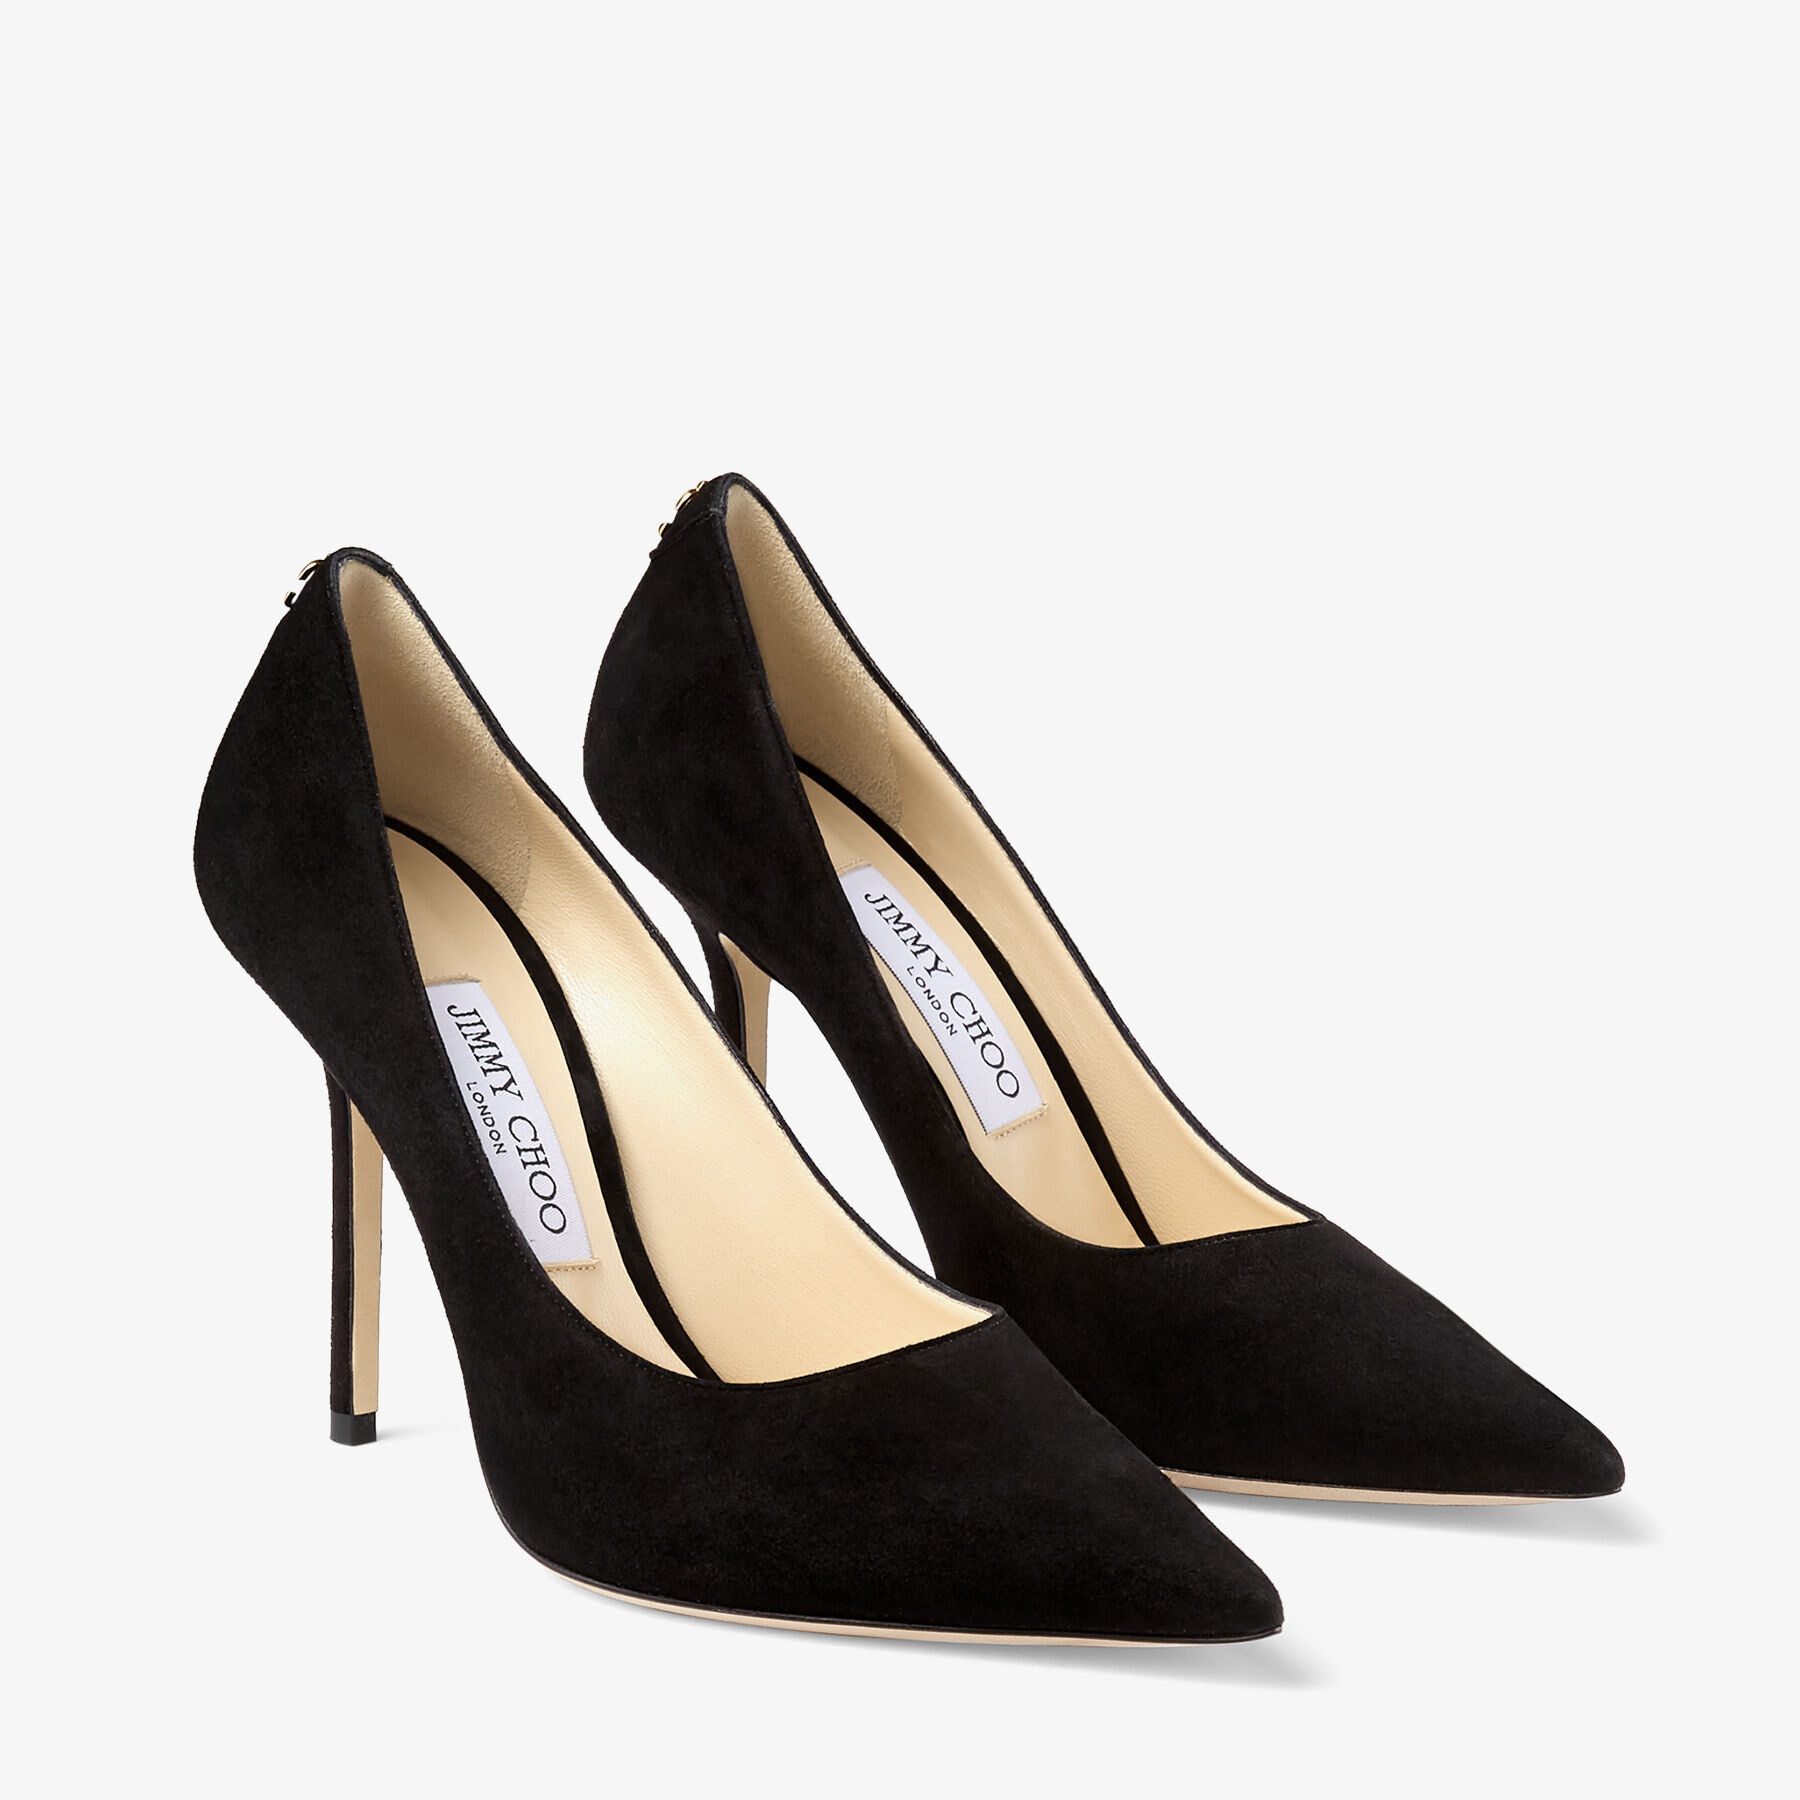 Love 100
Black Suede Pointy Toe Pumps with Jimmy Choo Button - 3